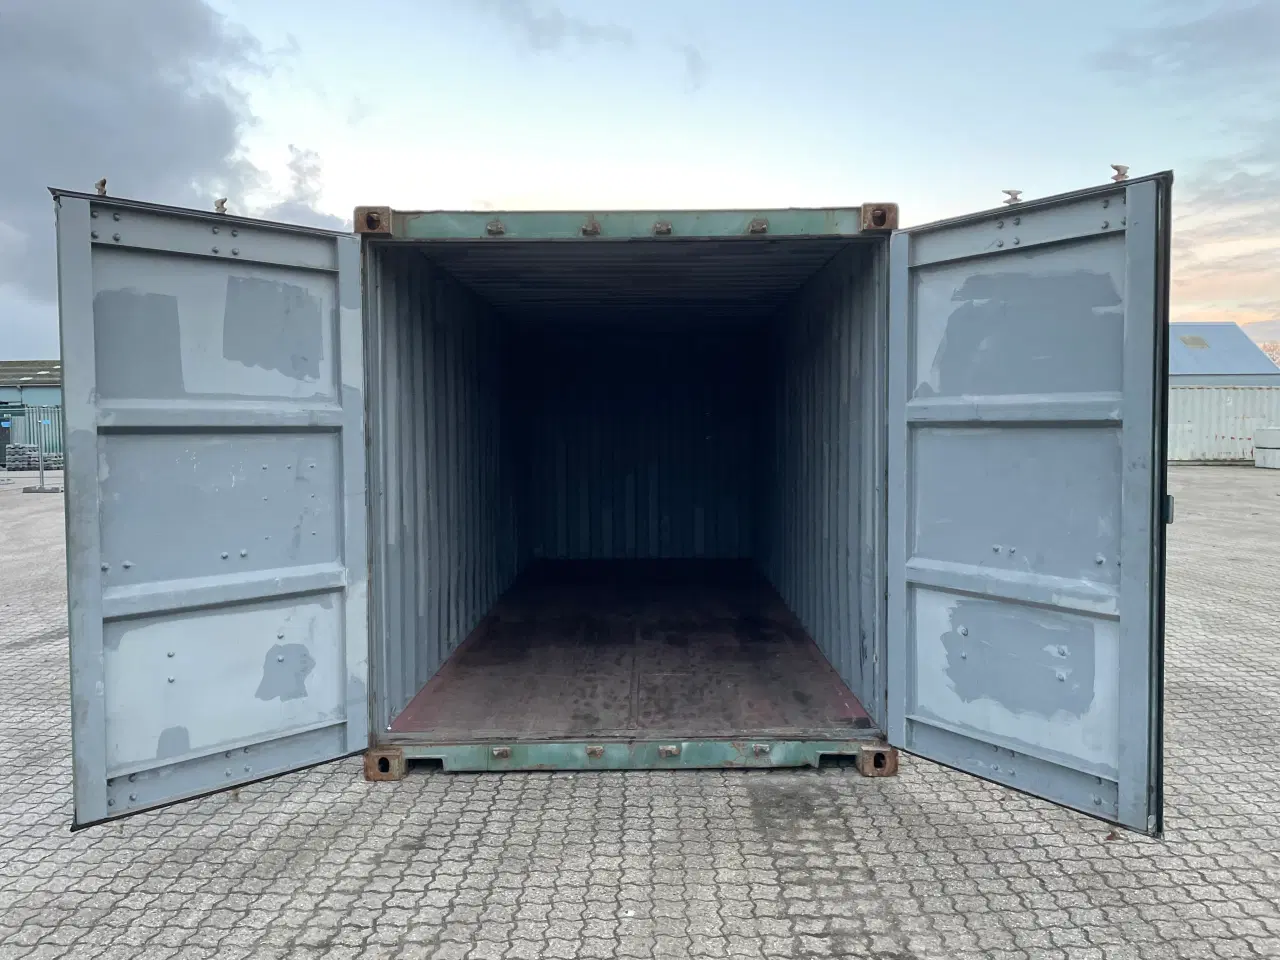 Billede 2 - 20 fods container - ID: CLHU 355296-2